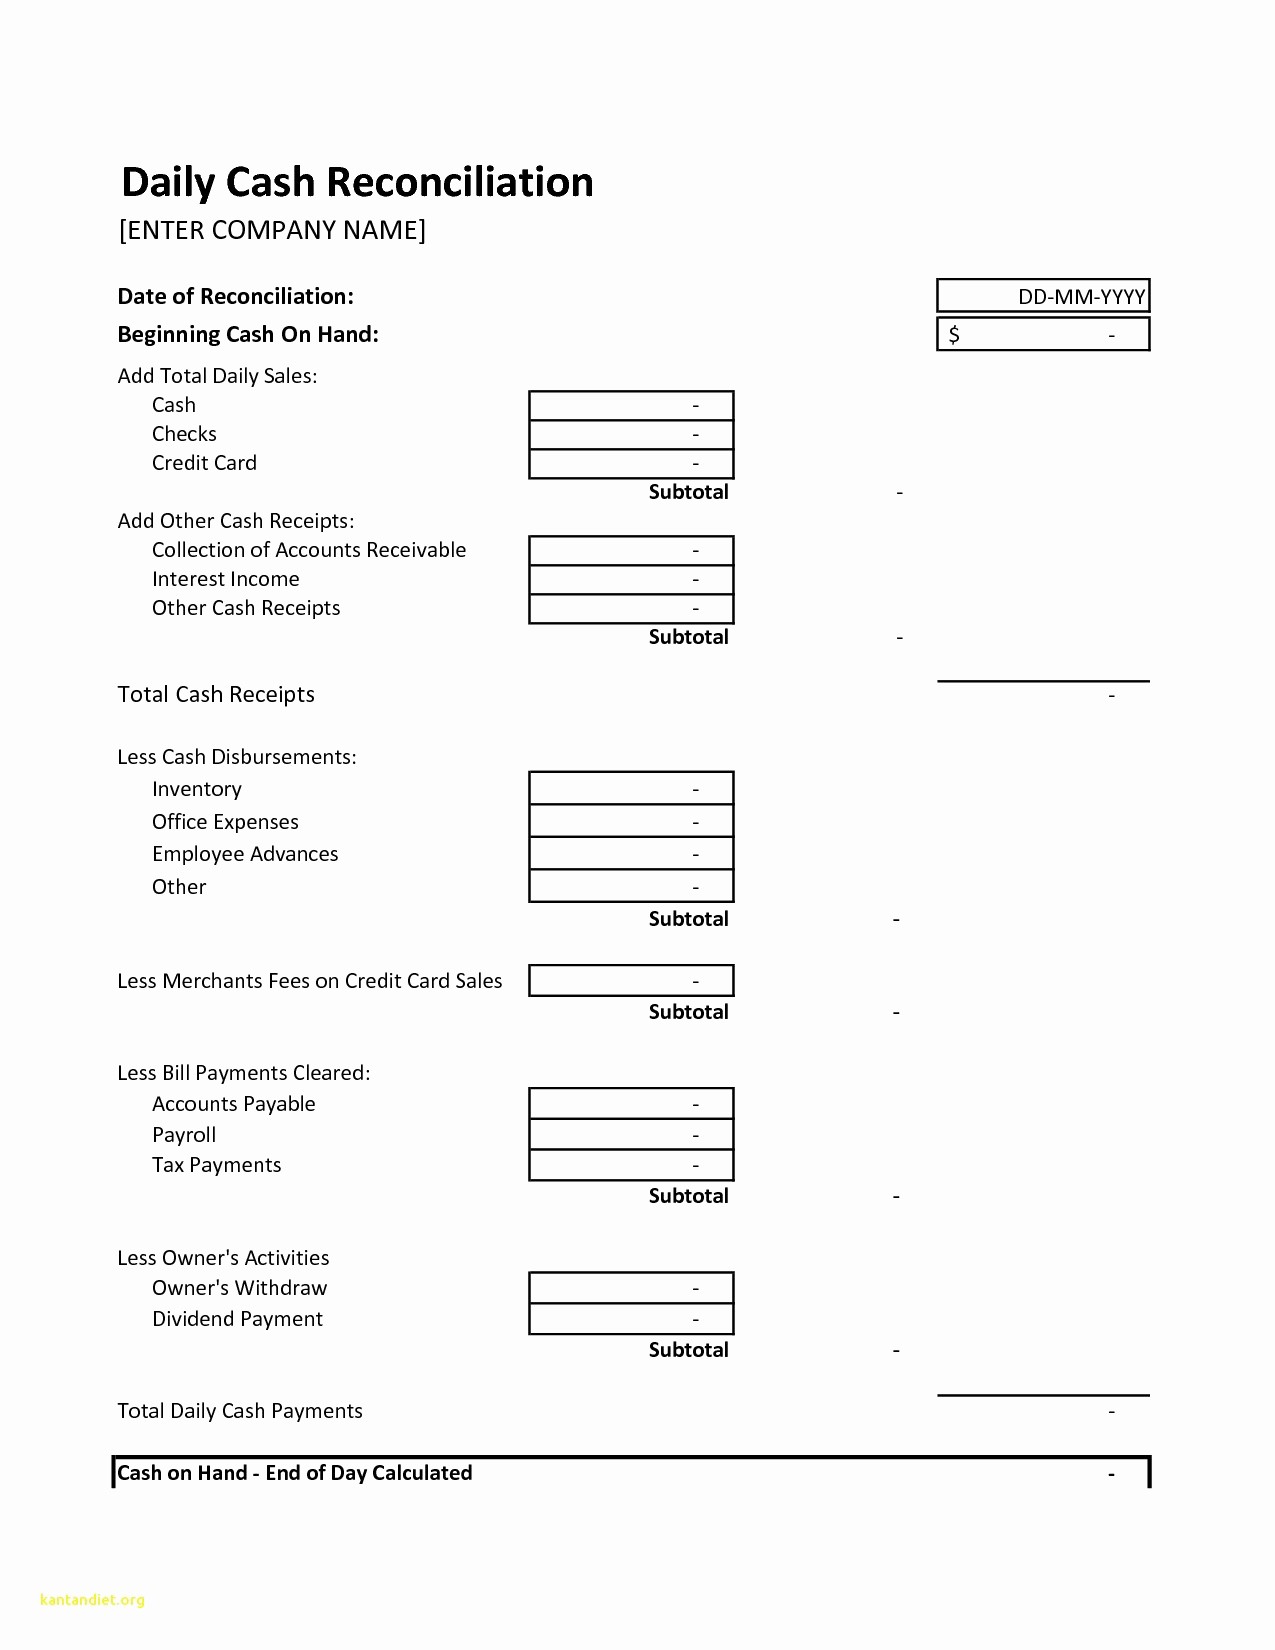 Daily Cash Report Template Excel Lovely Daily Cash Sheet Template Excel